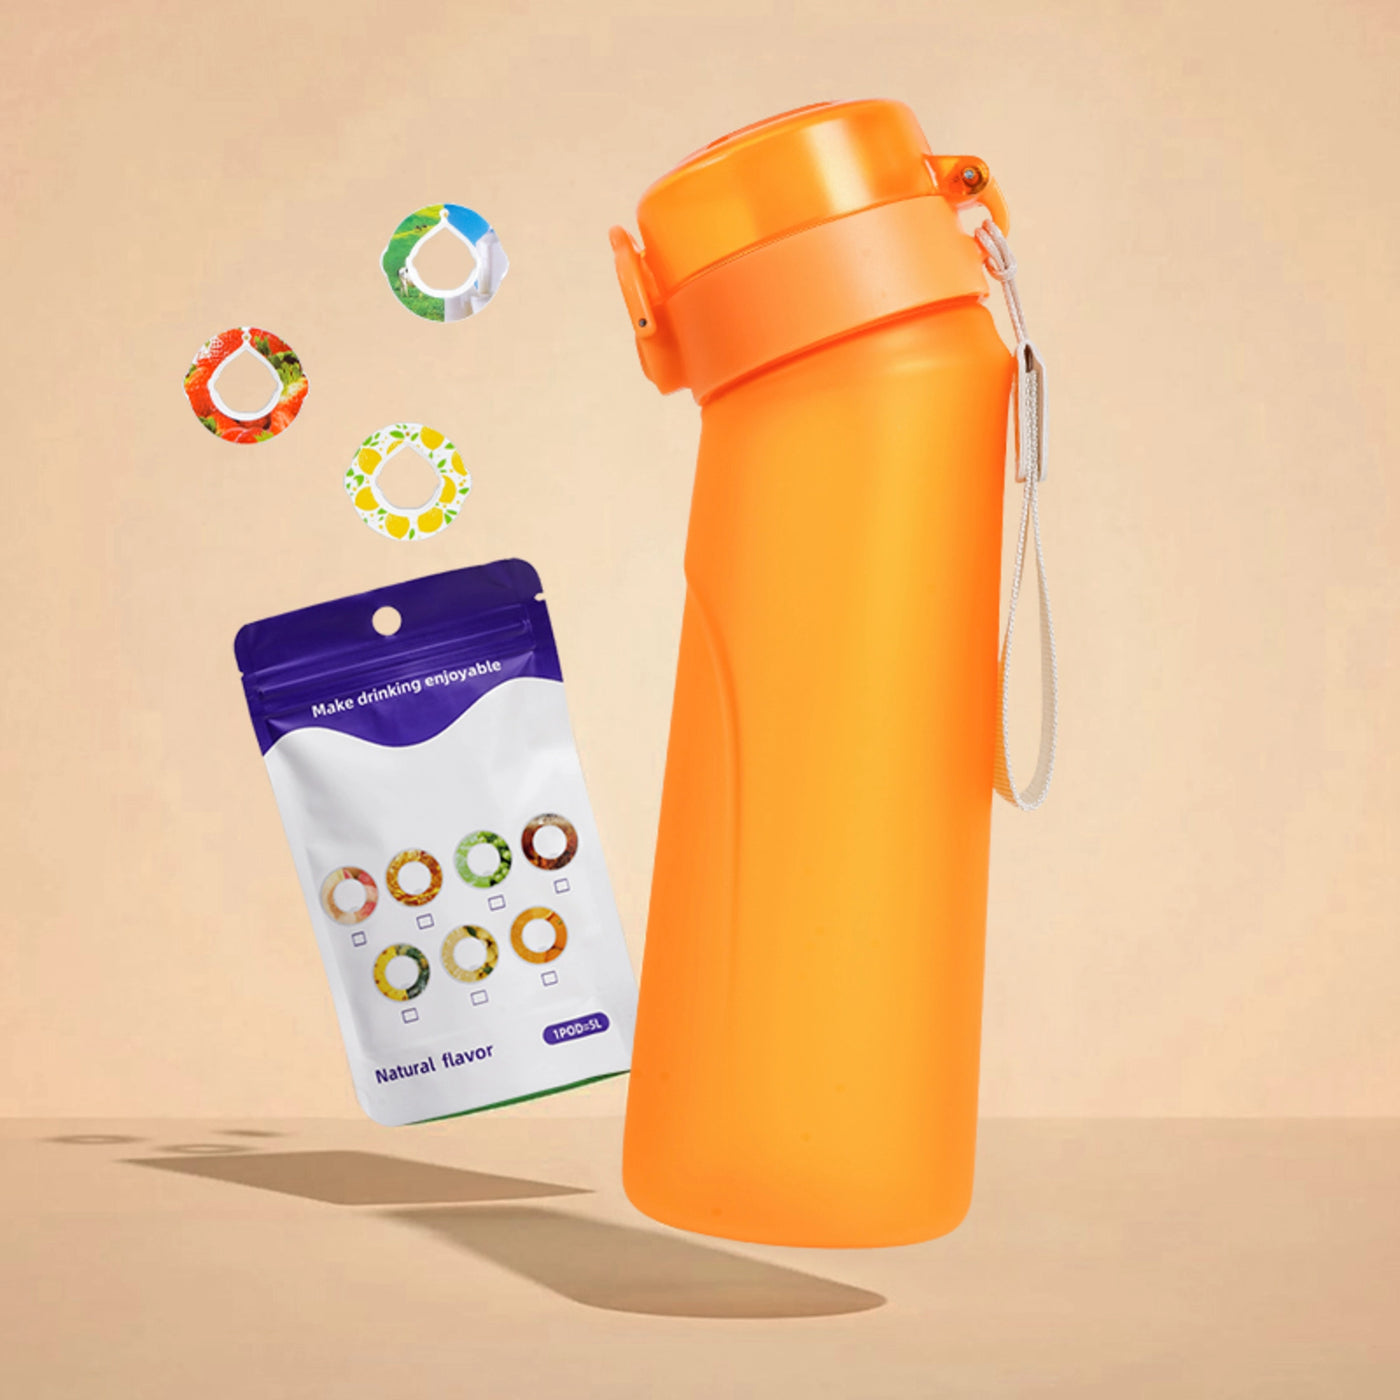 Experience hydration like never before with the premium flavored water bottle best that air-up